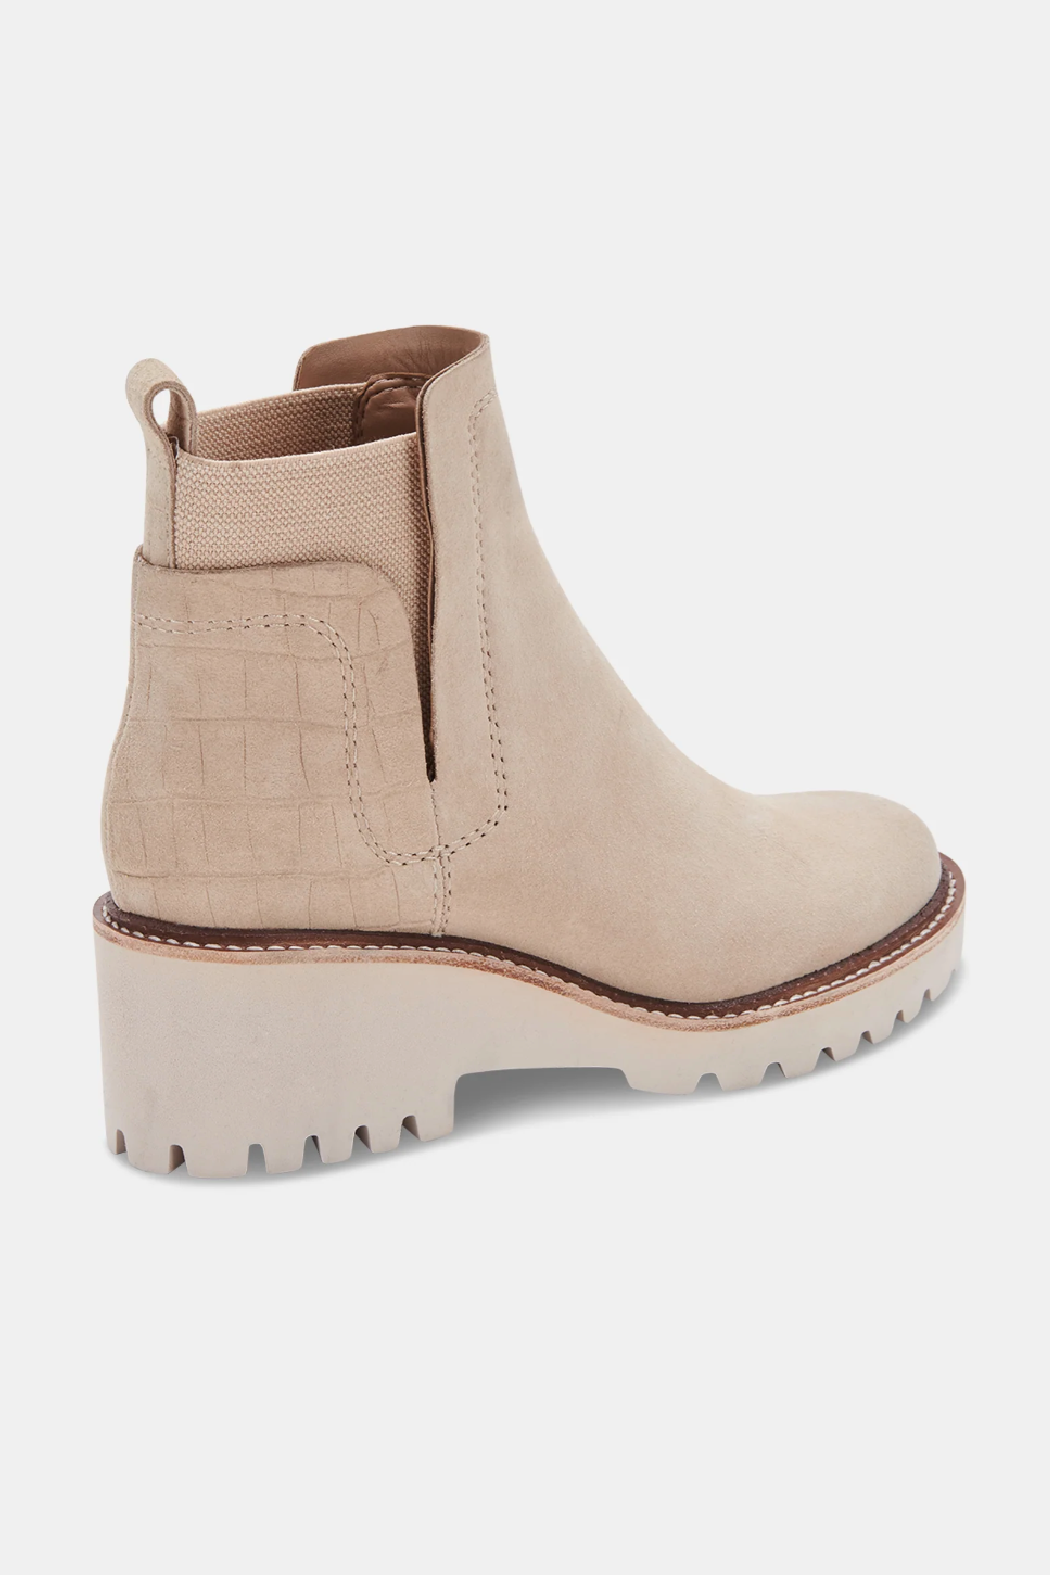 H20 Dune Boots